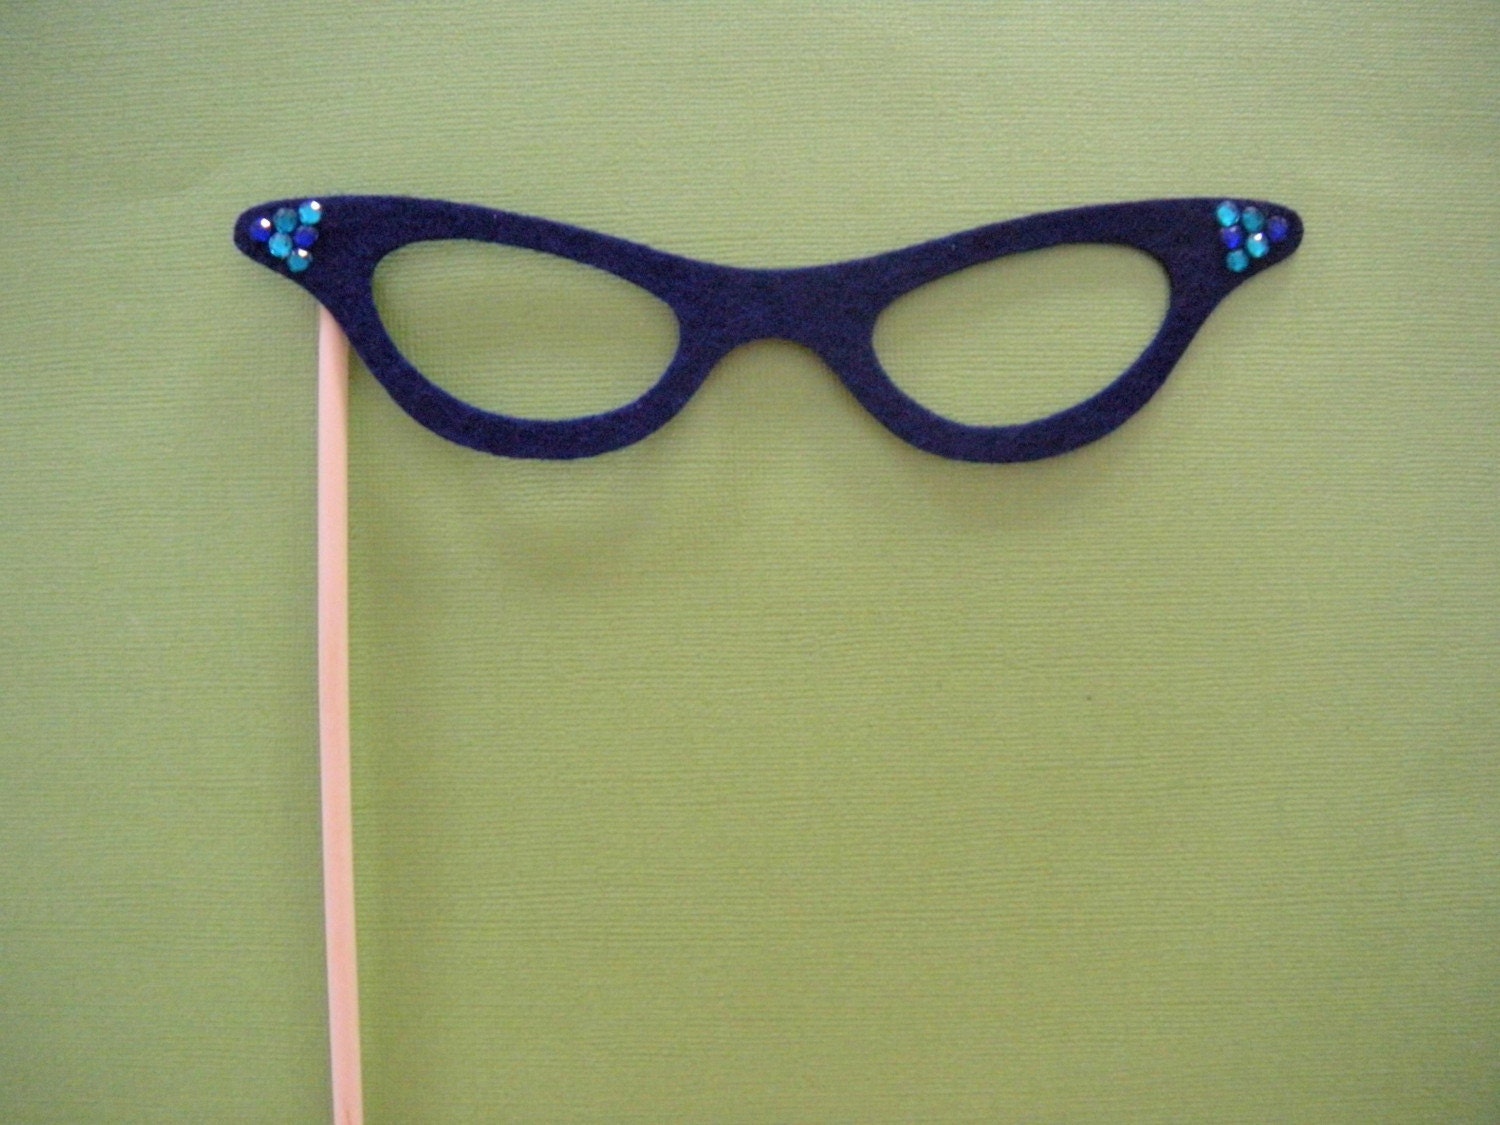 Glasses on a Stick - The Cat